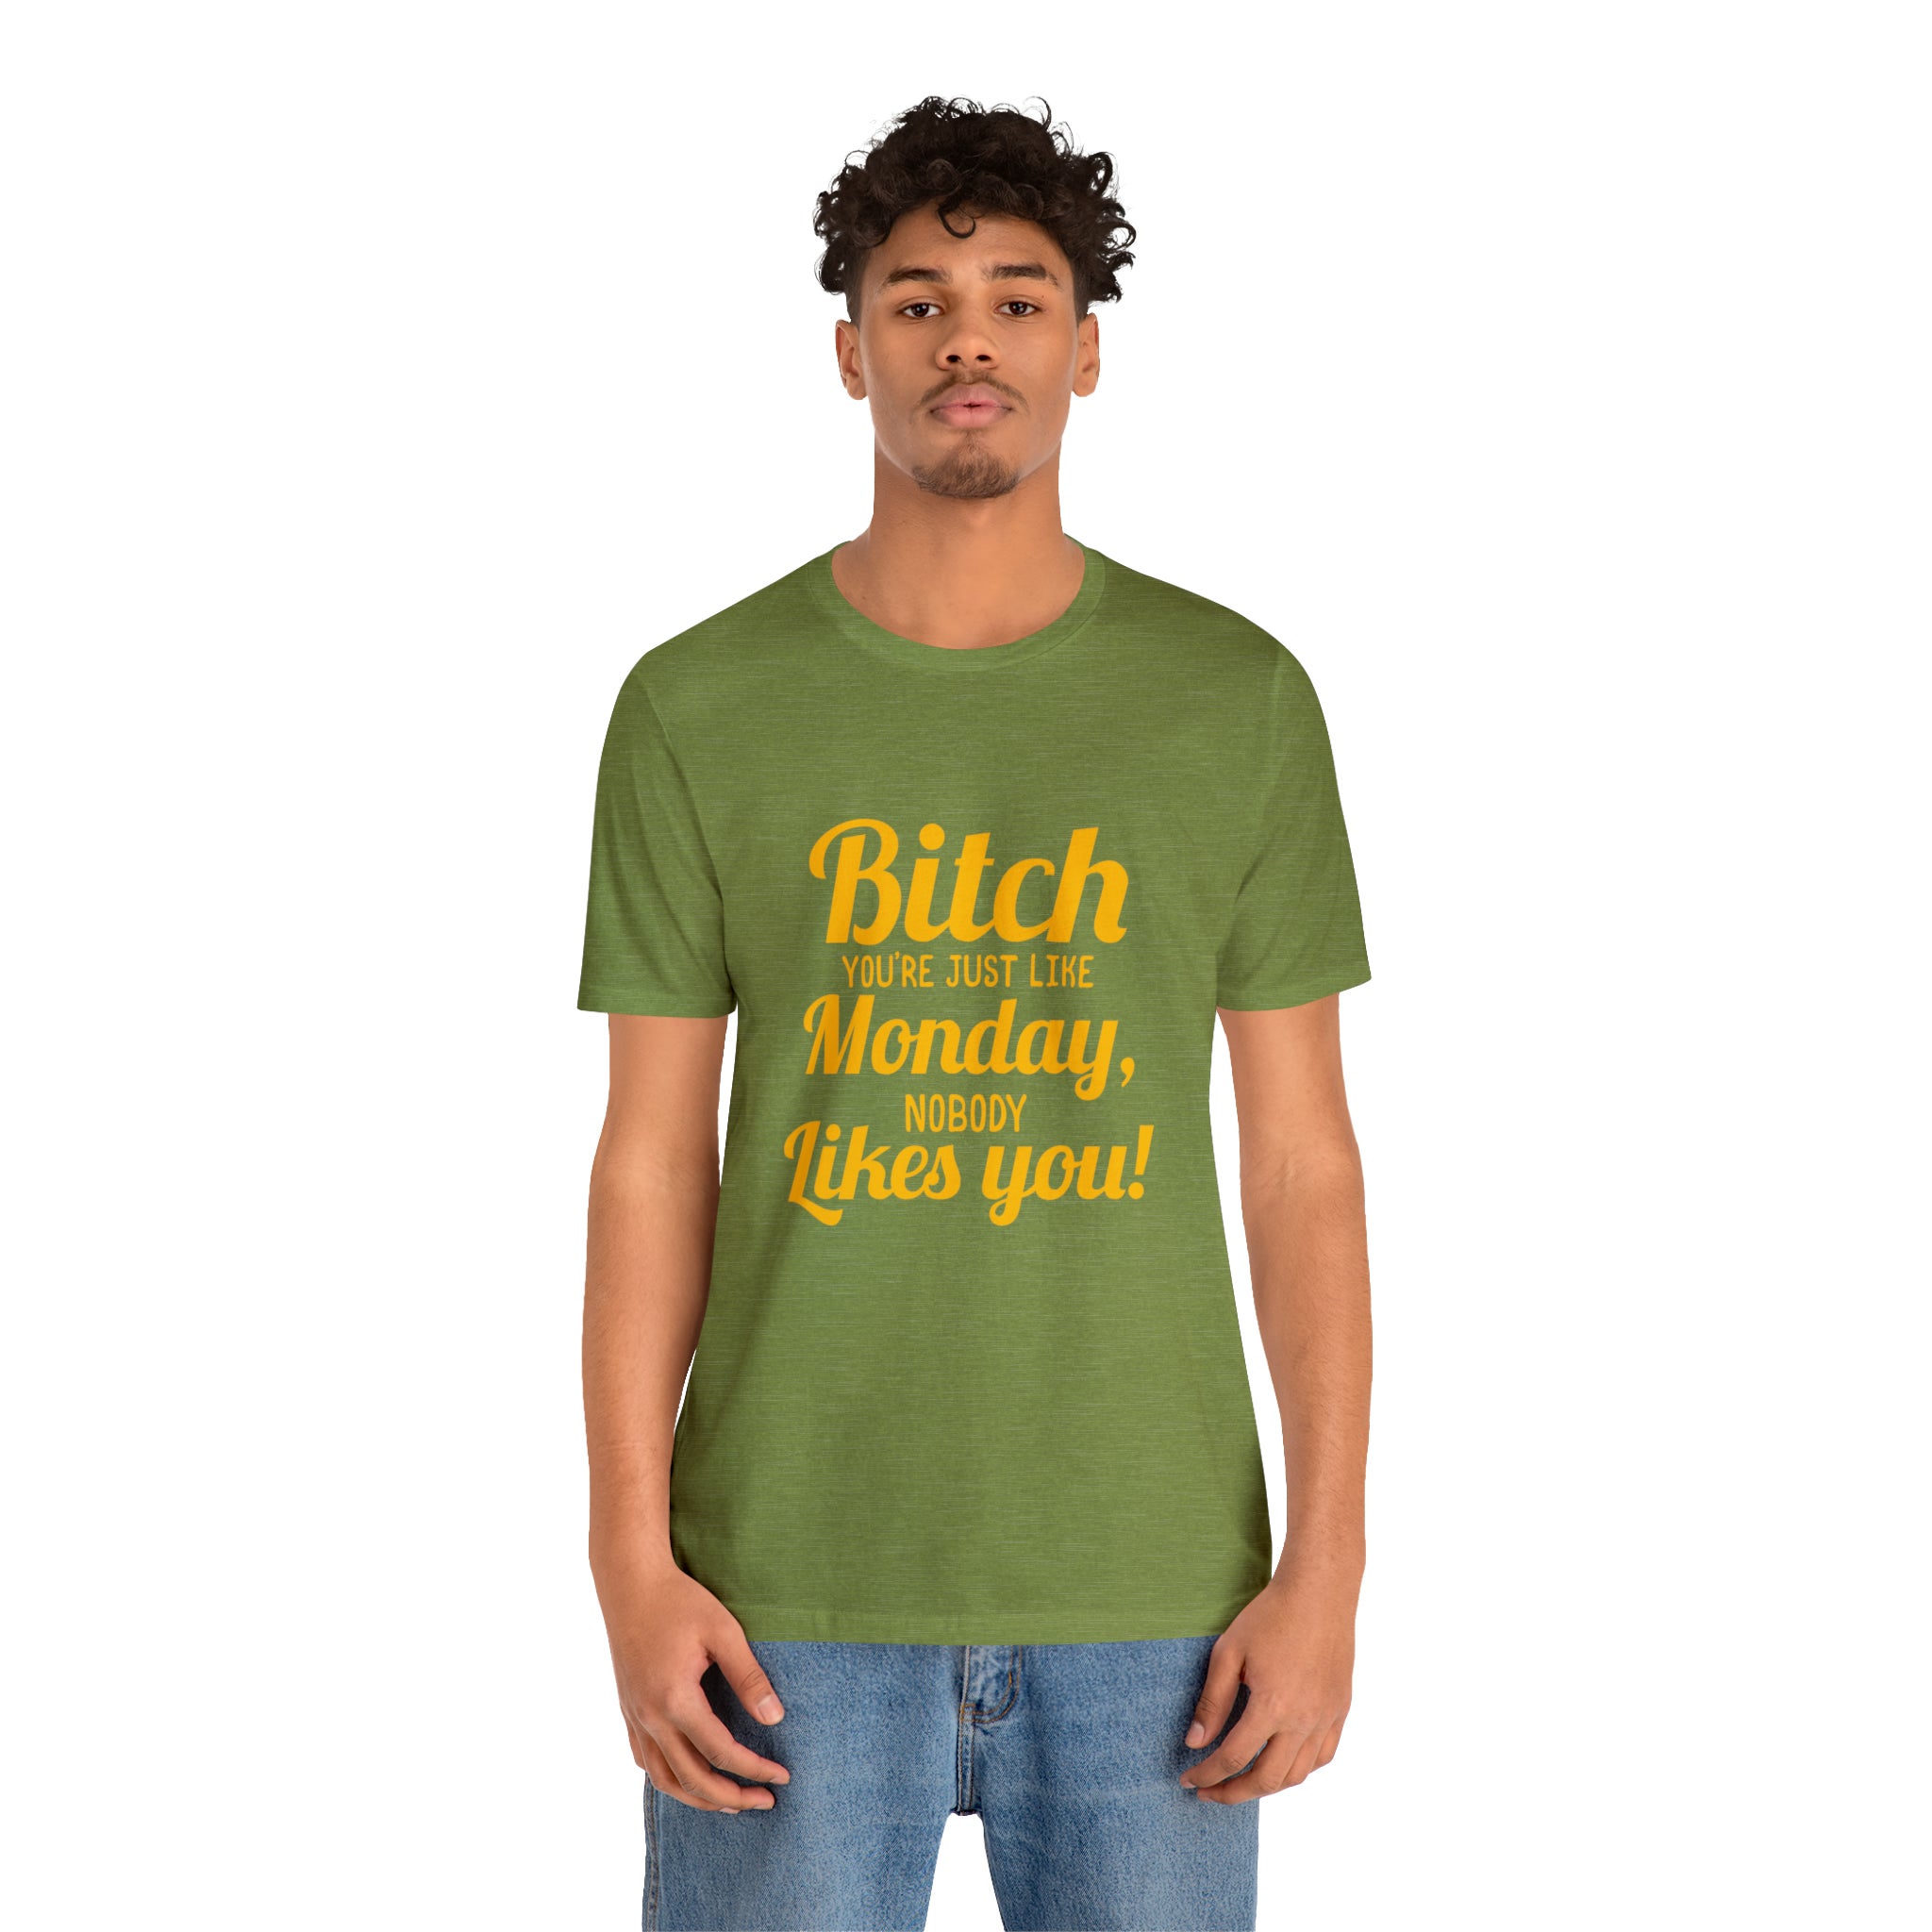 Bitch you are just like Monday nobody likes you t-shirt.